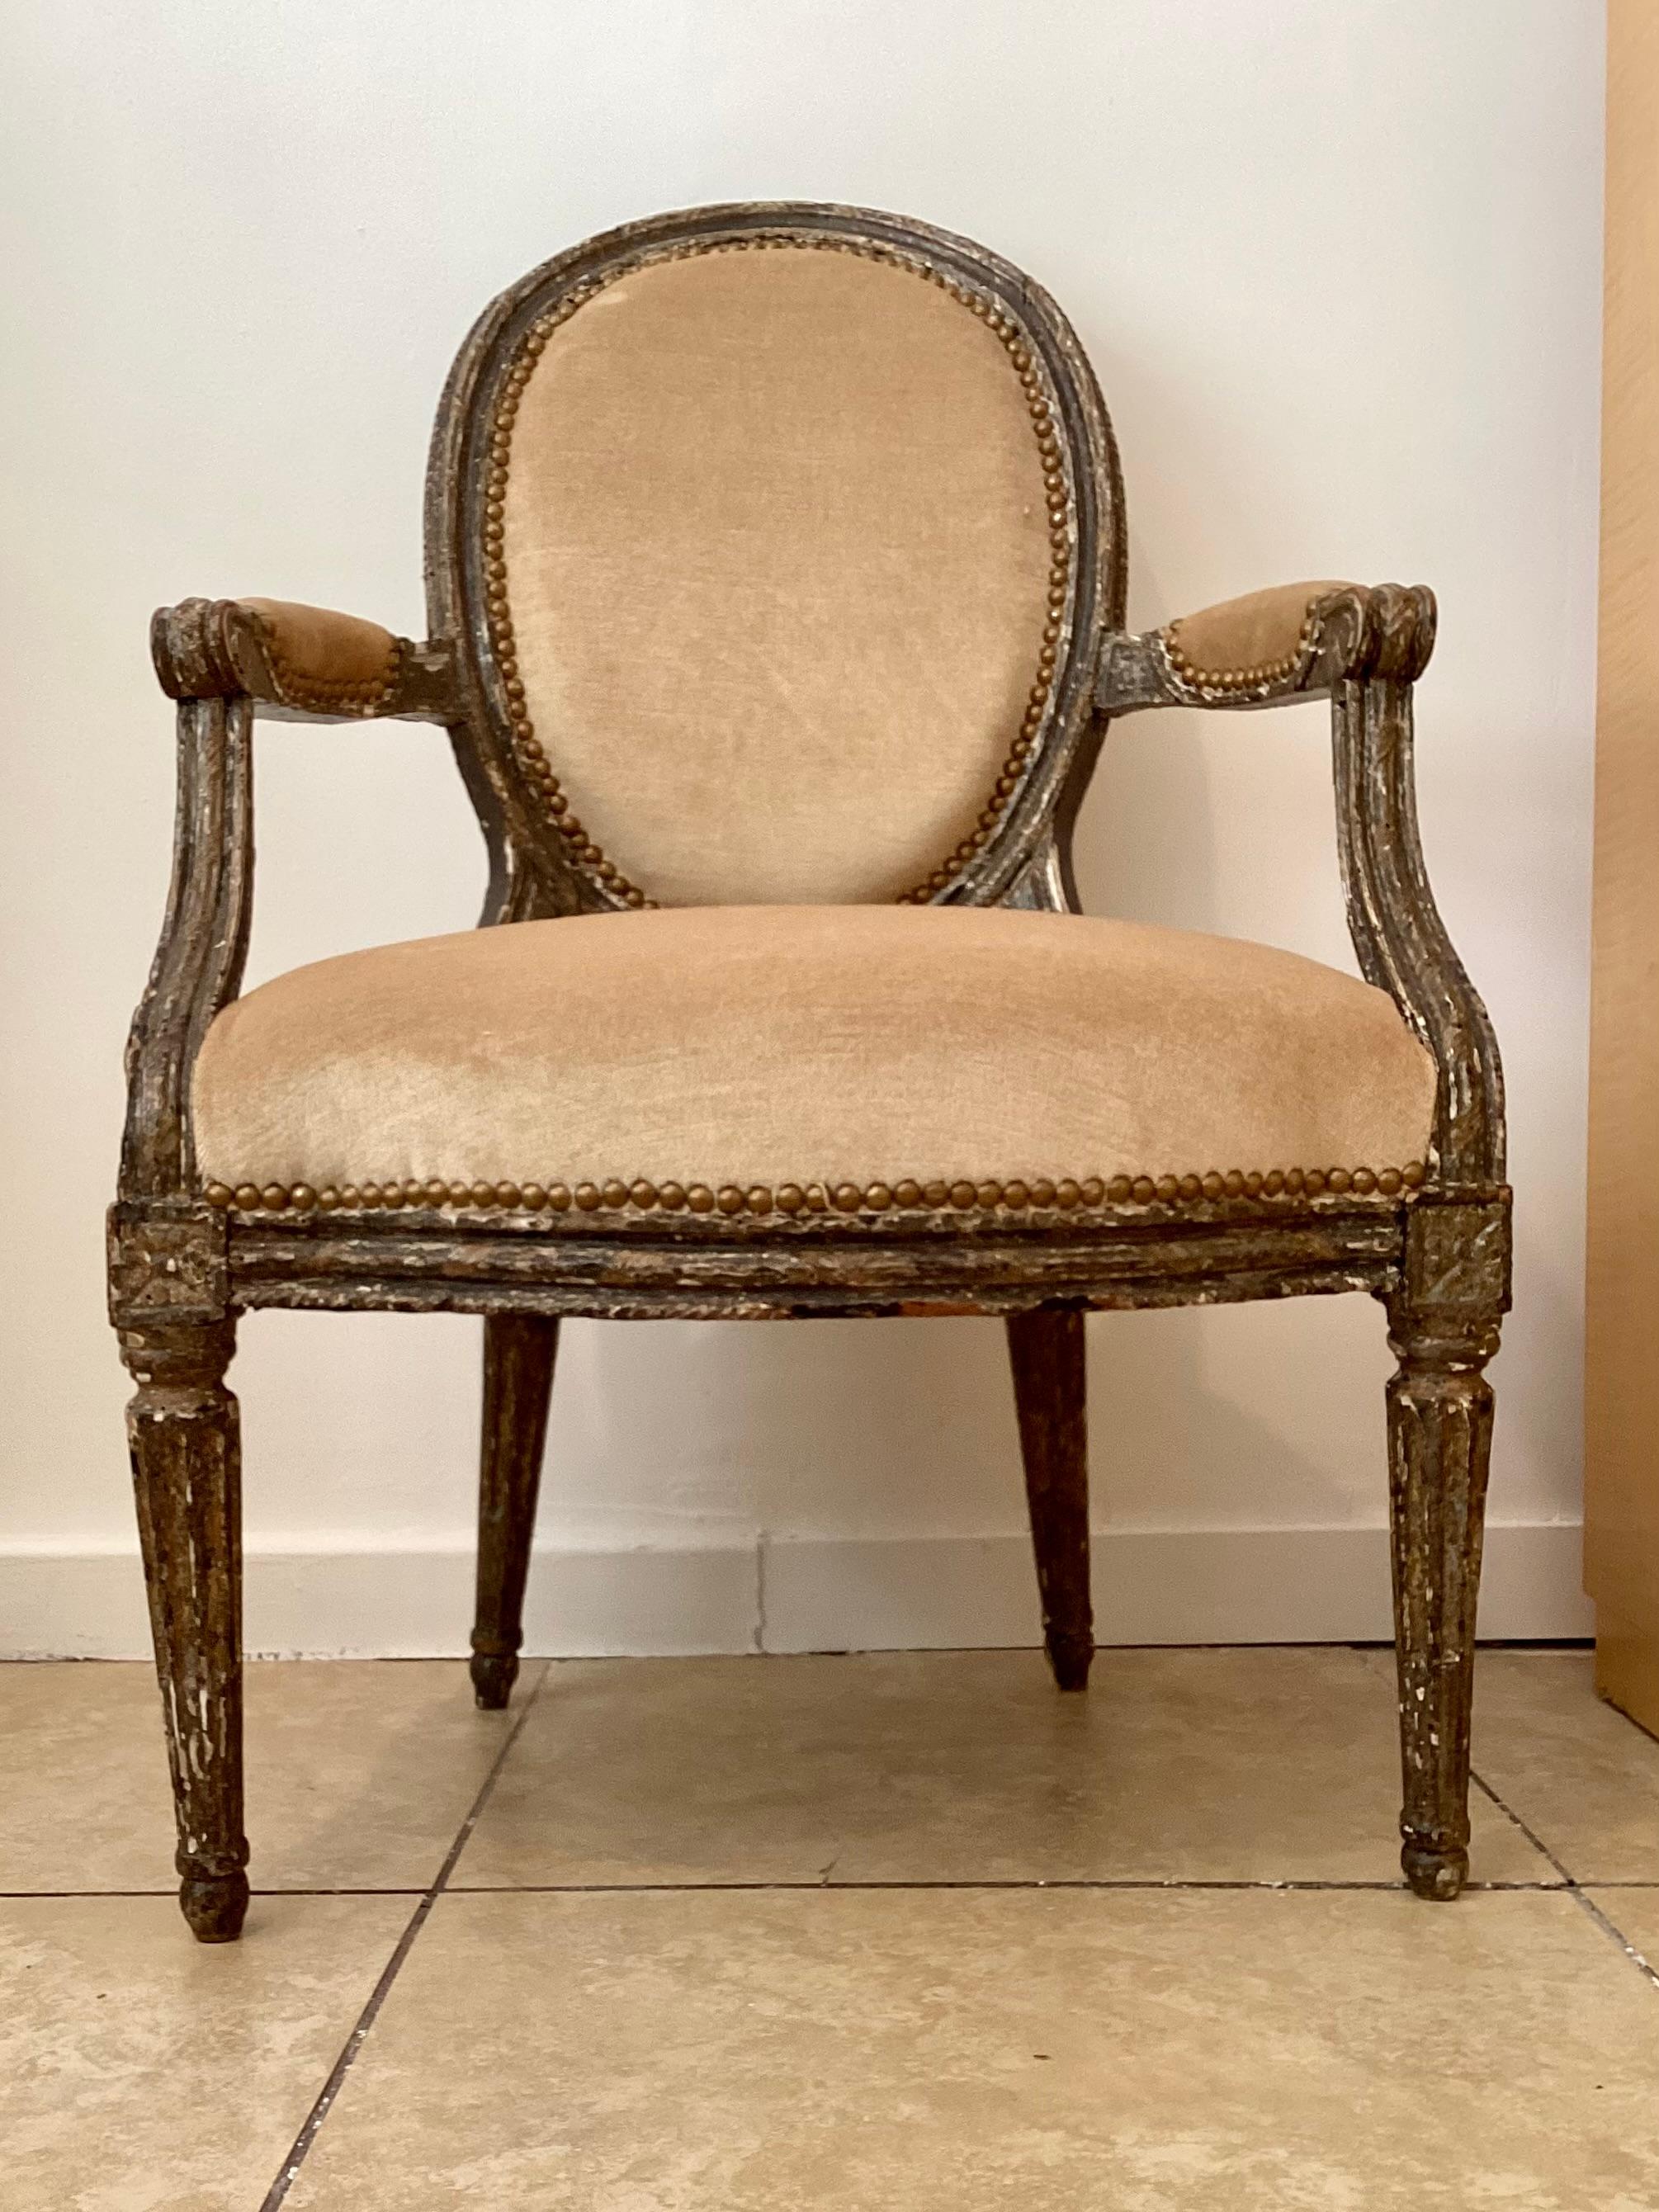 French 18th century Louis XVI fauteuil chair in new Todd Hase Silk Mohair upholstery. Original frame unaltered.